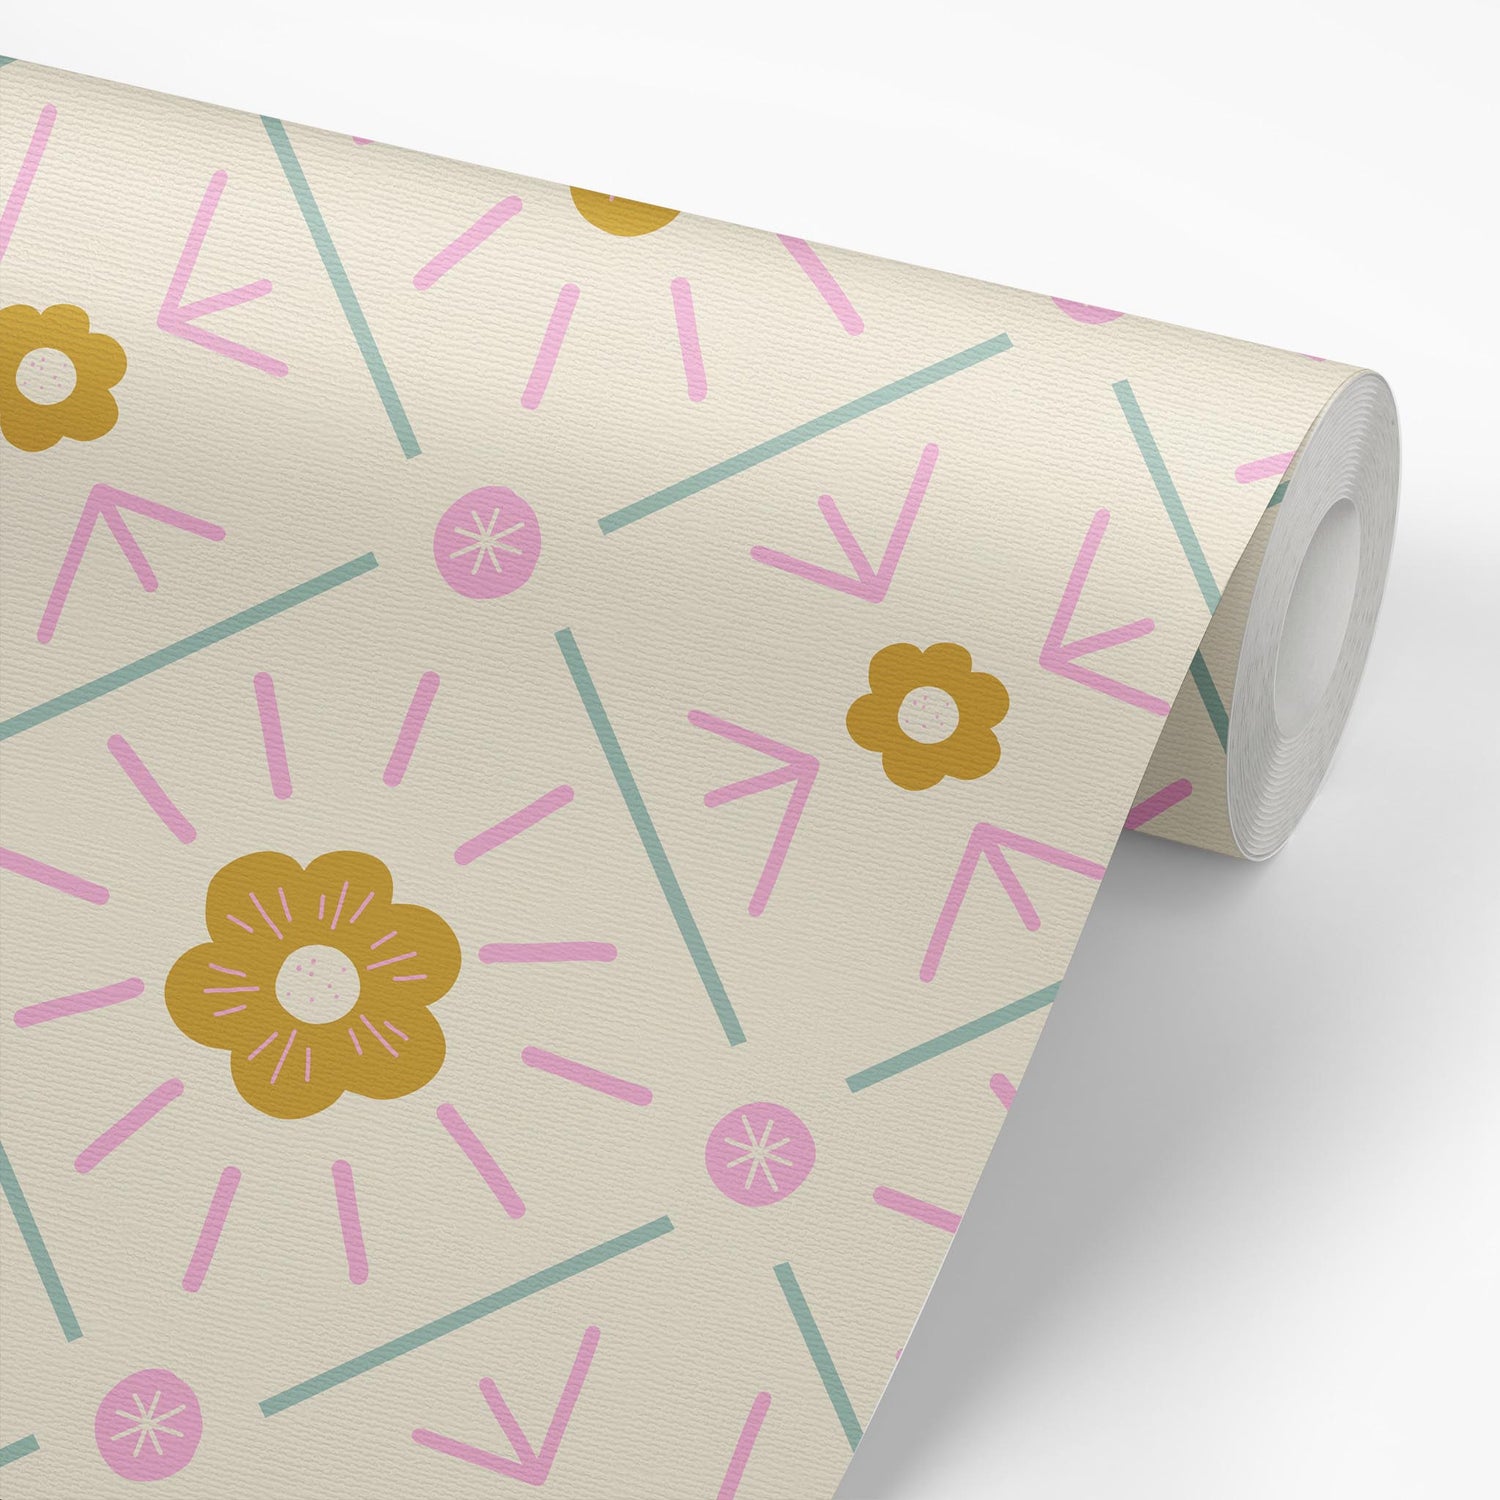 Sample roll of Daisy Squares Wallpaper in Green and Pink by artist Brenda Bird